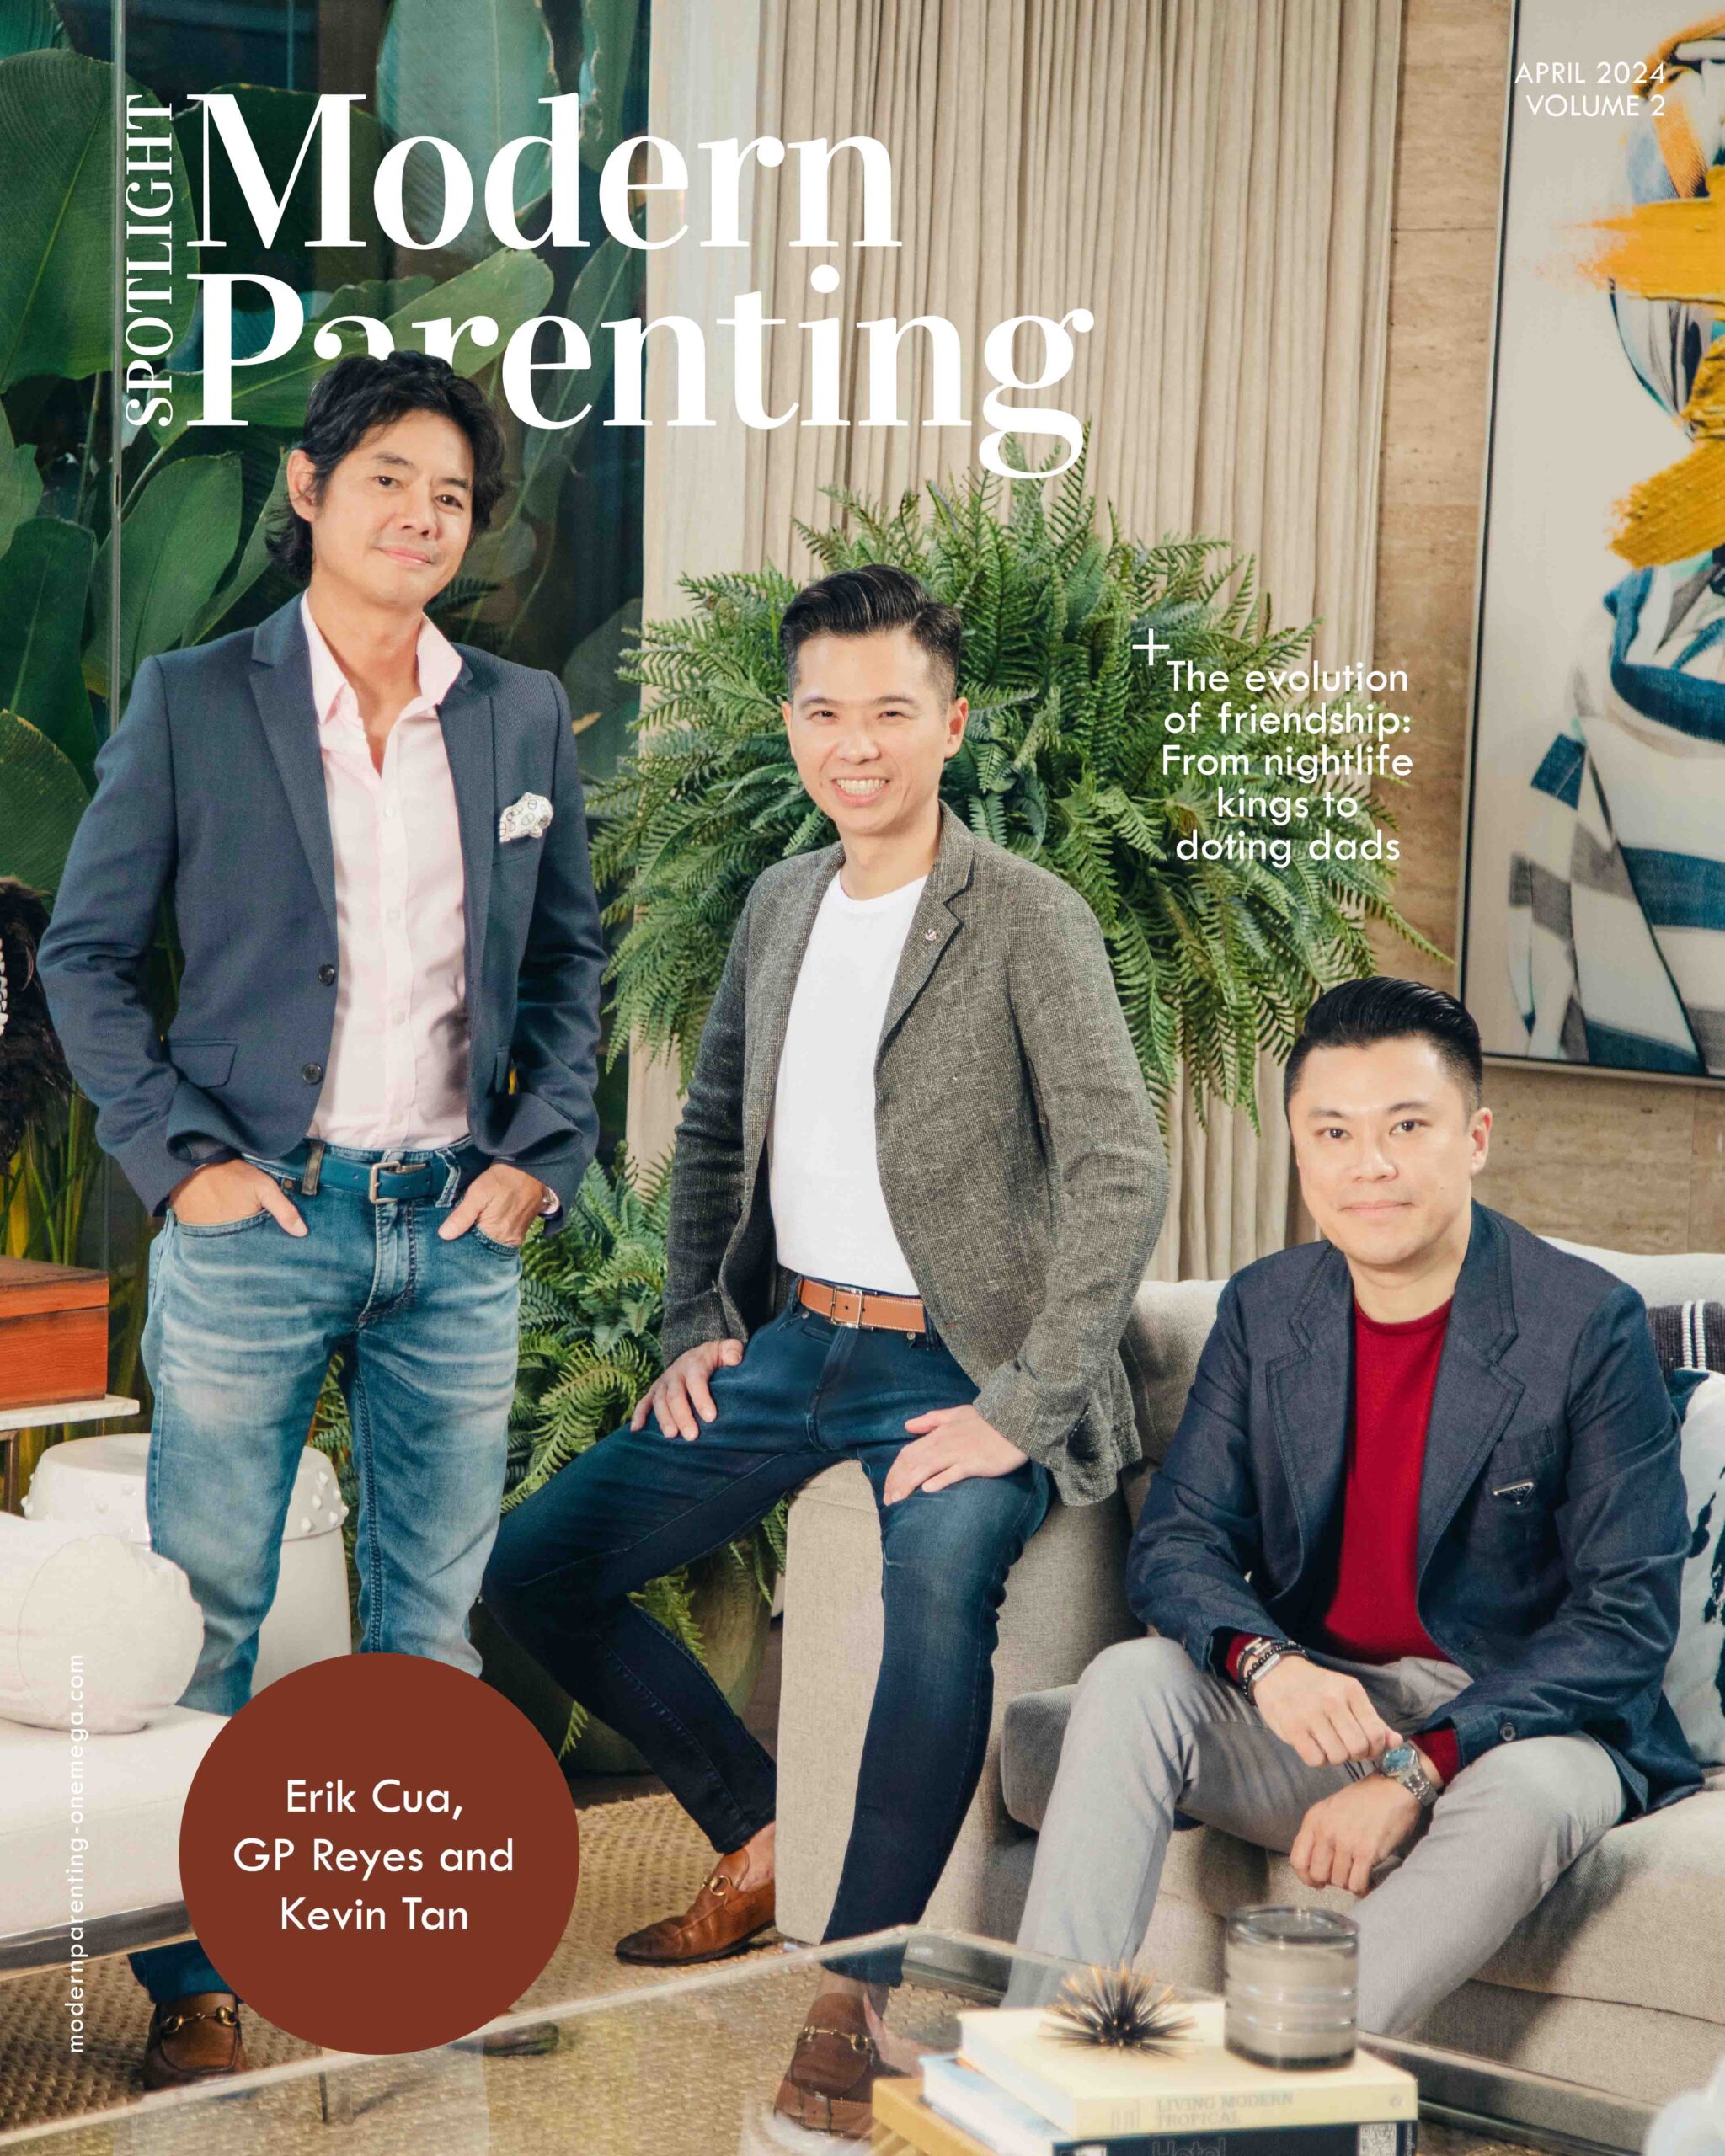 Erik Cua, GP Reyes, and Kevin Tan: Transitioning From Night Life to Family Life